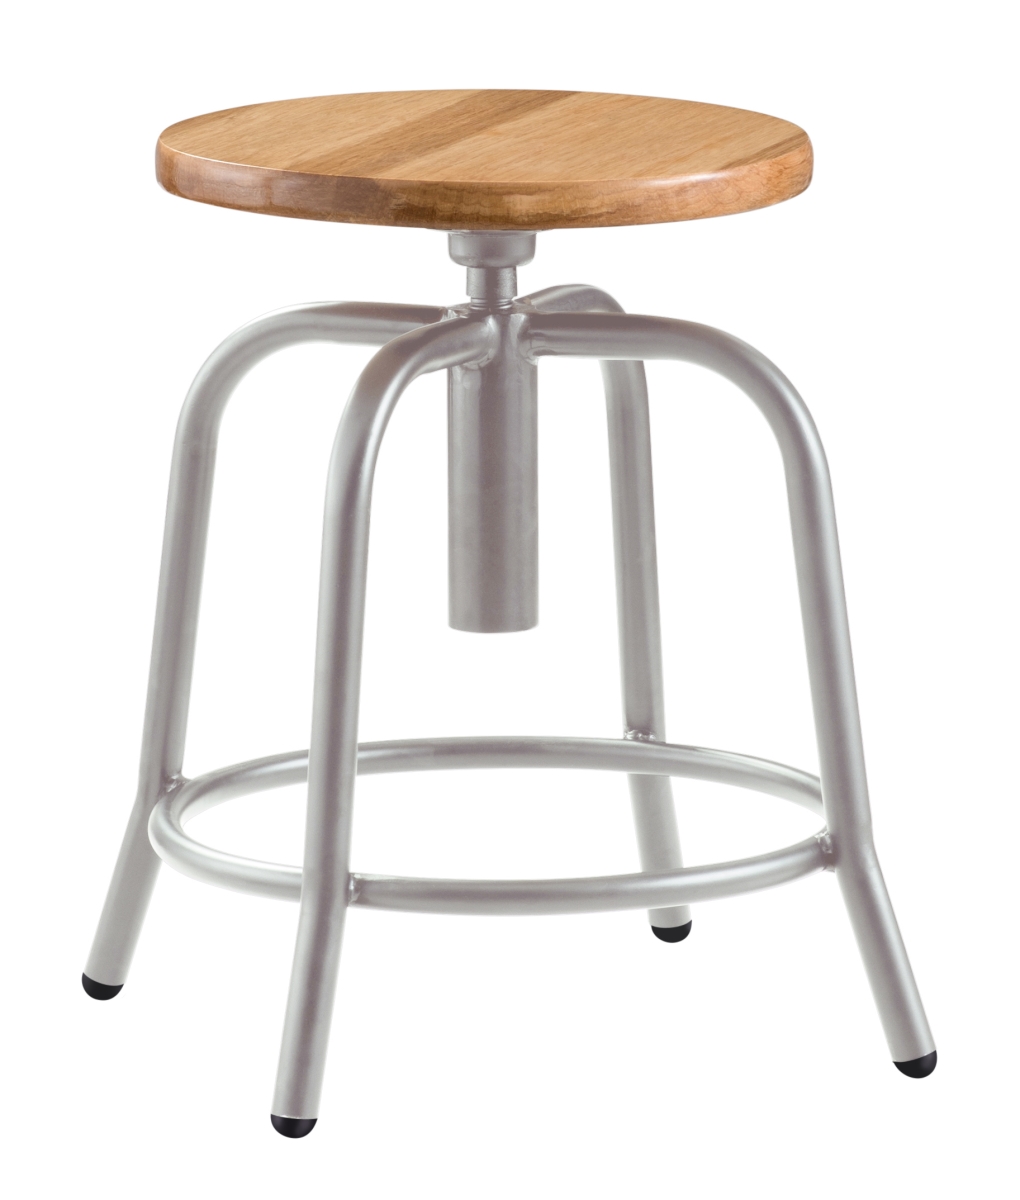 6800w-02 18 - 25 In. Height Adjustable Designer Stool With Wooden Seat & Grey Frame